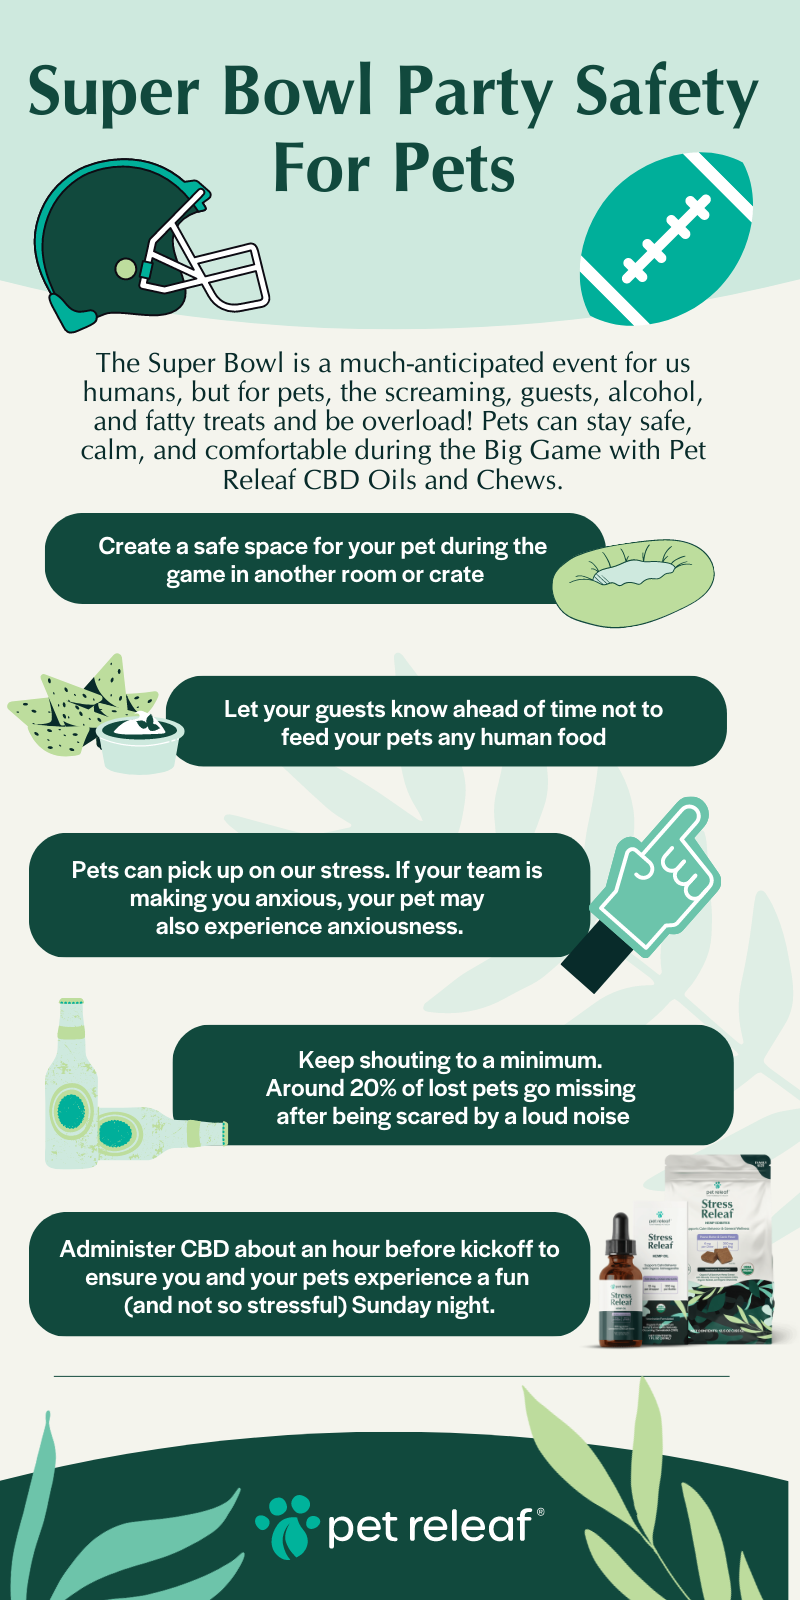 Super Bowl Party Safety For Pets Infographic